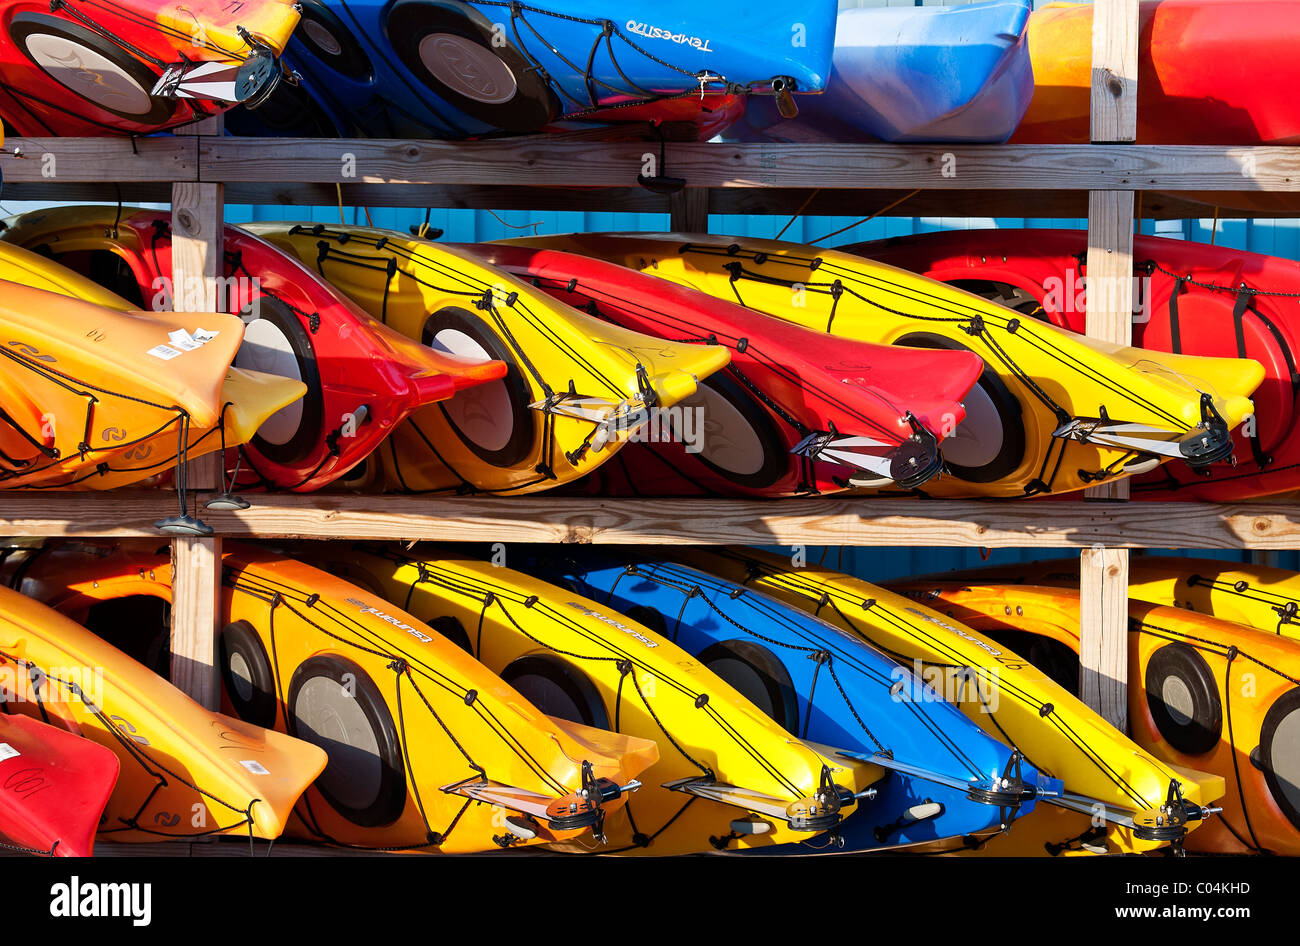 Rows of colorful kayak rentals. Stock Photo